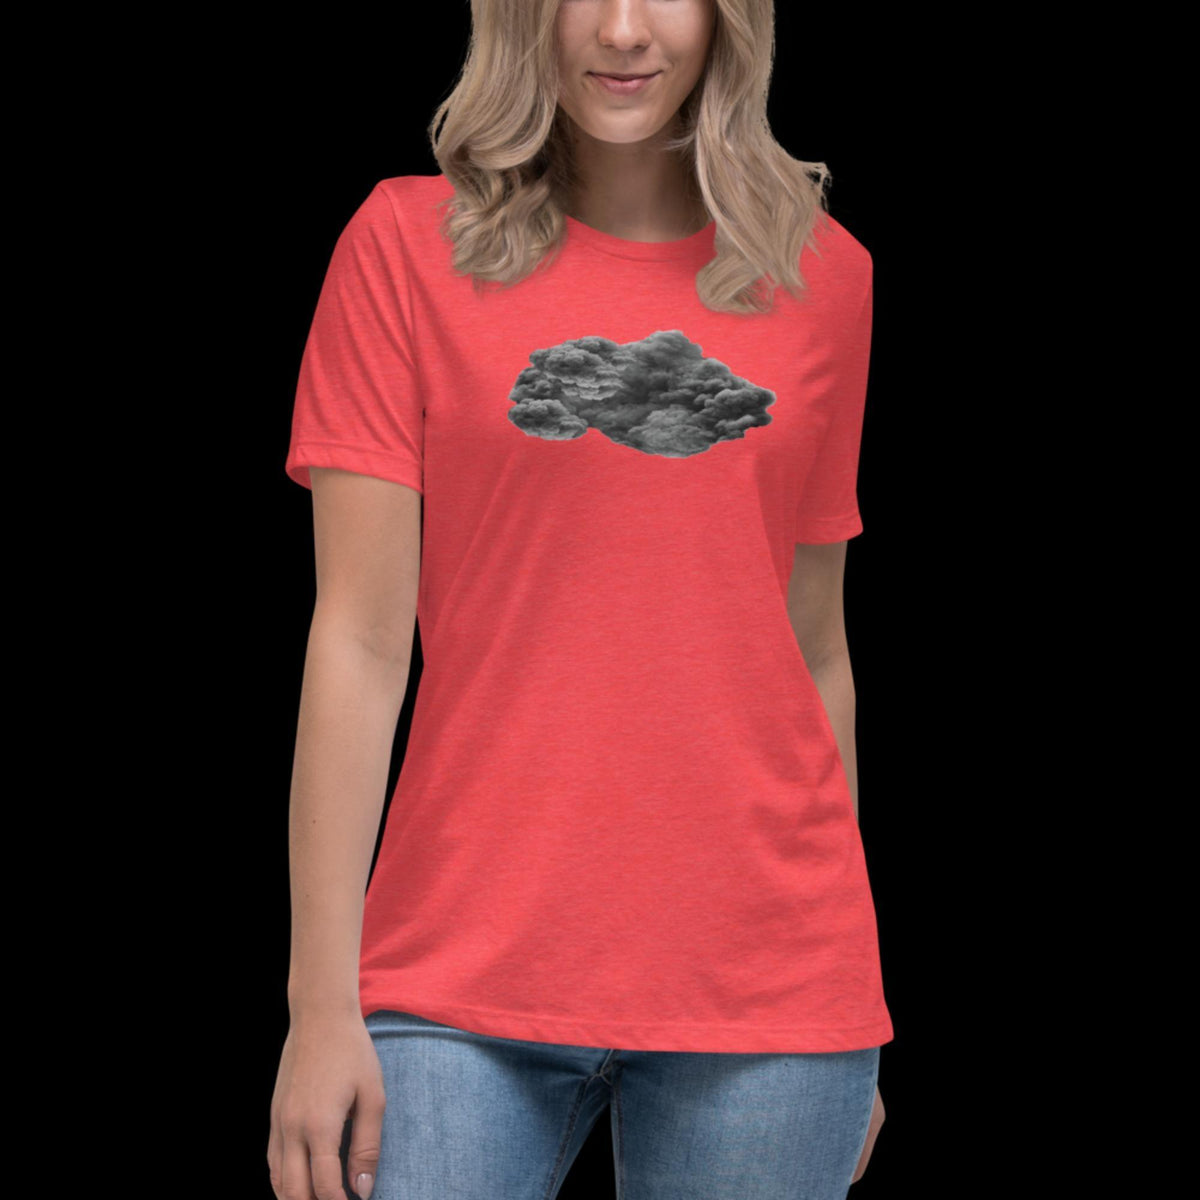 Black Cloud Women's Relaxed T-Shirt - Salty Medic Clothing Co.